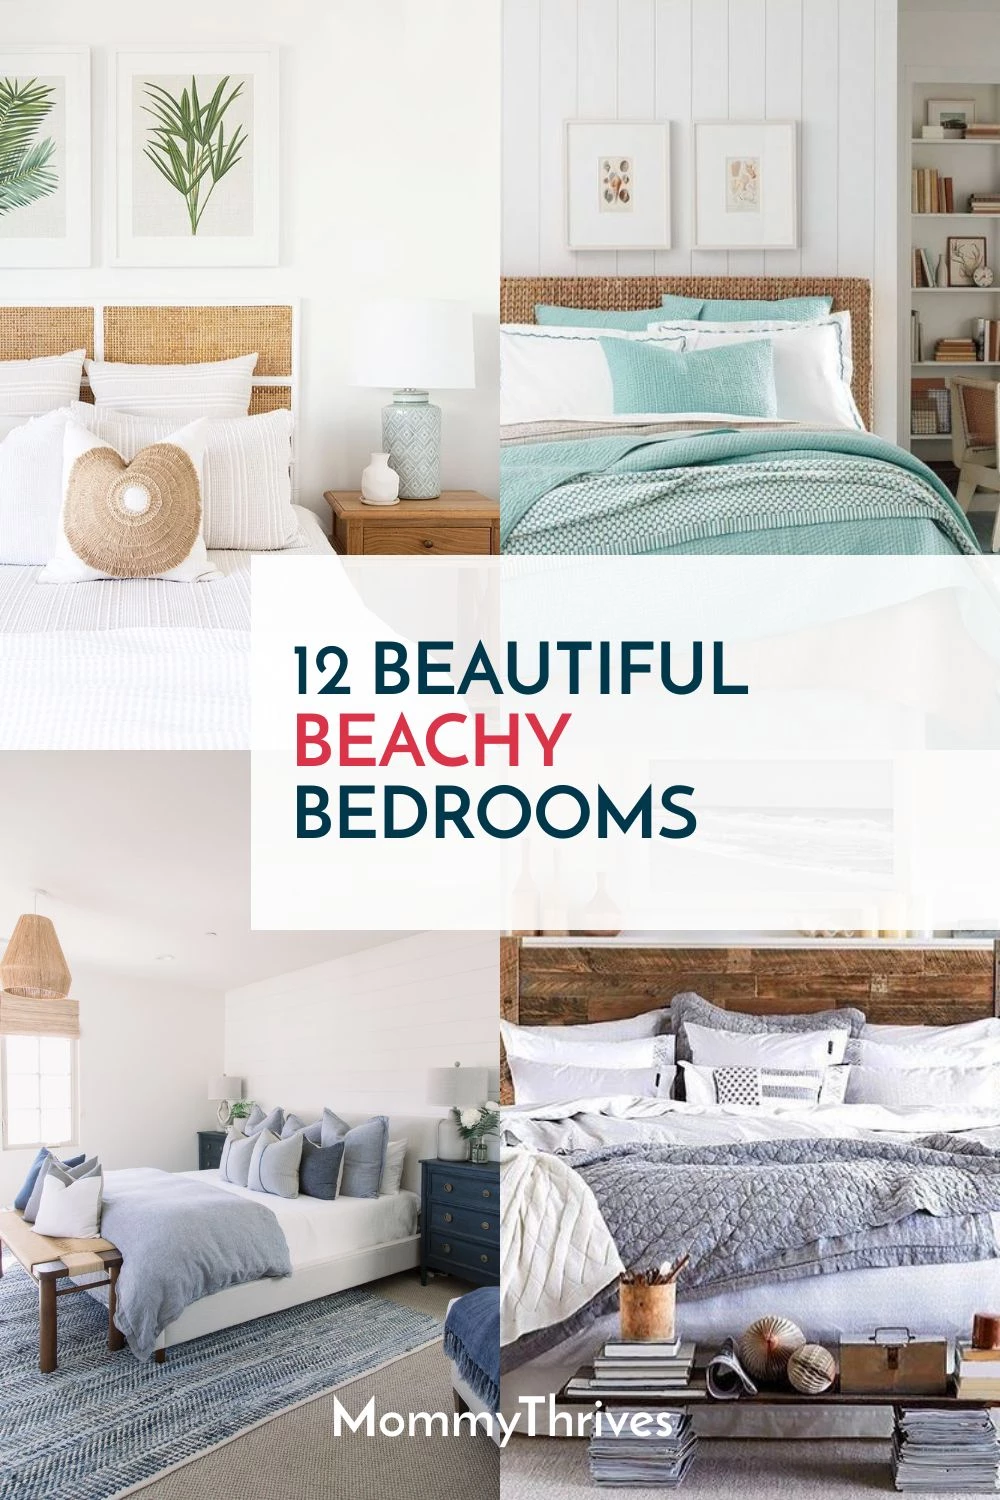 Mom has 12 beautiful bedrooms on the beach